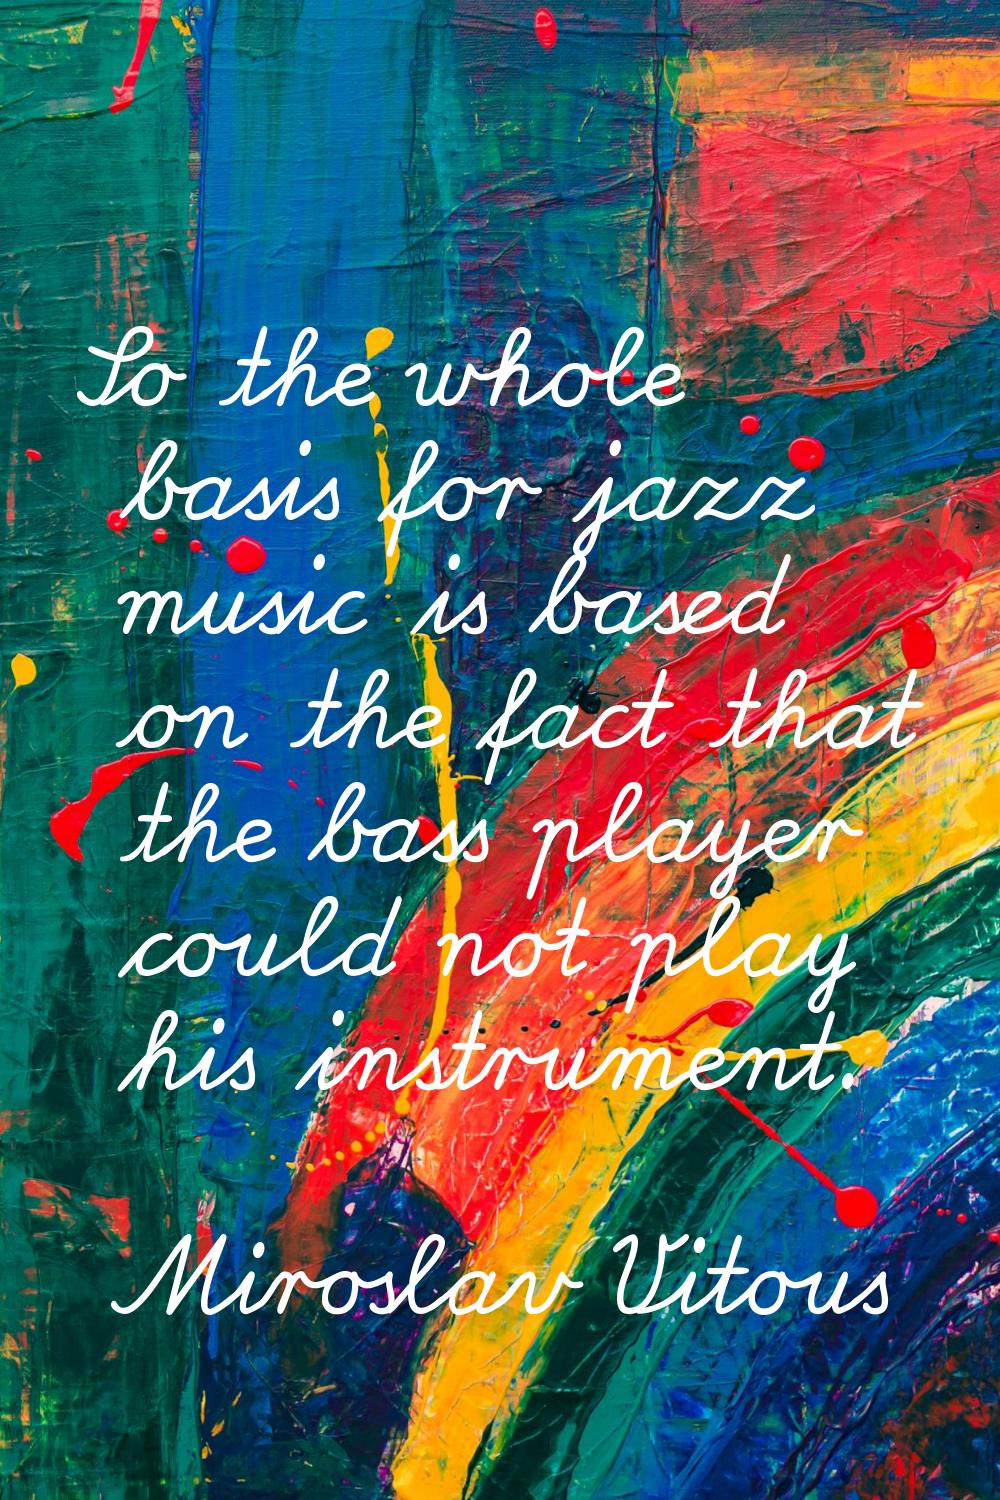 So the whole basis for jazz music is based on the fact that the bass player could not play his inst